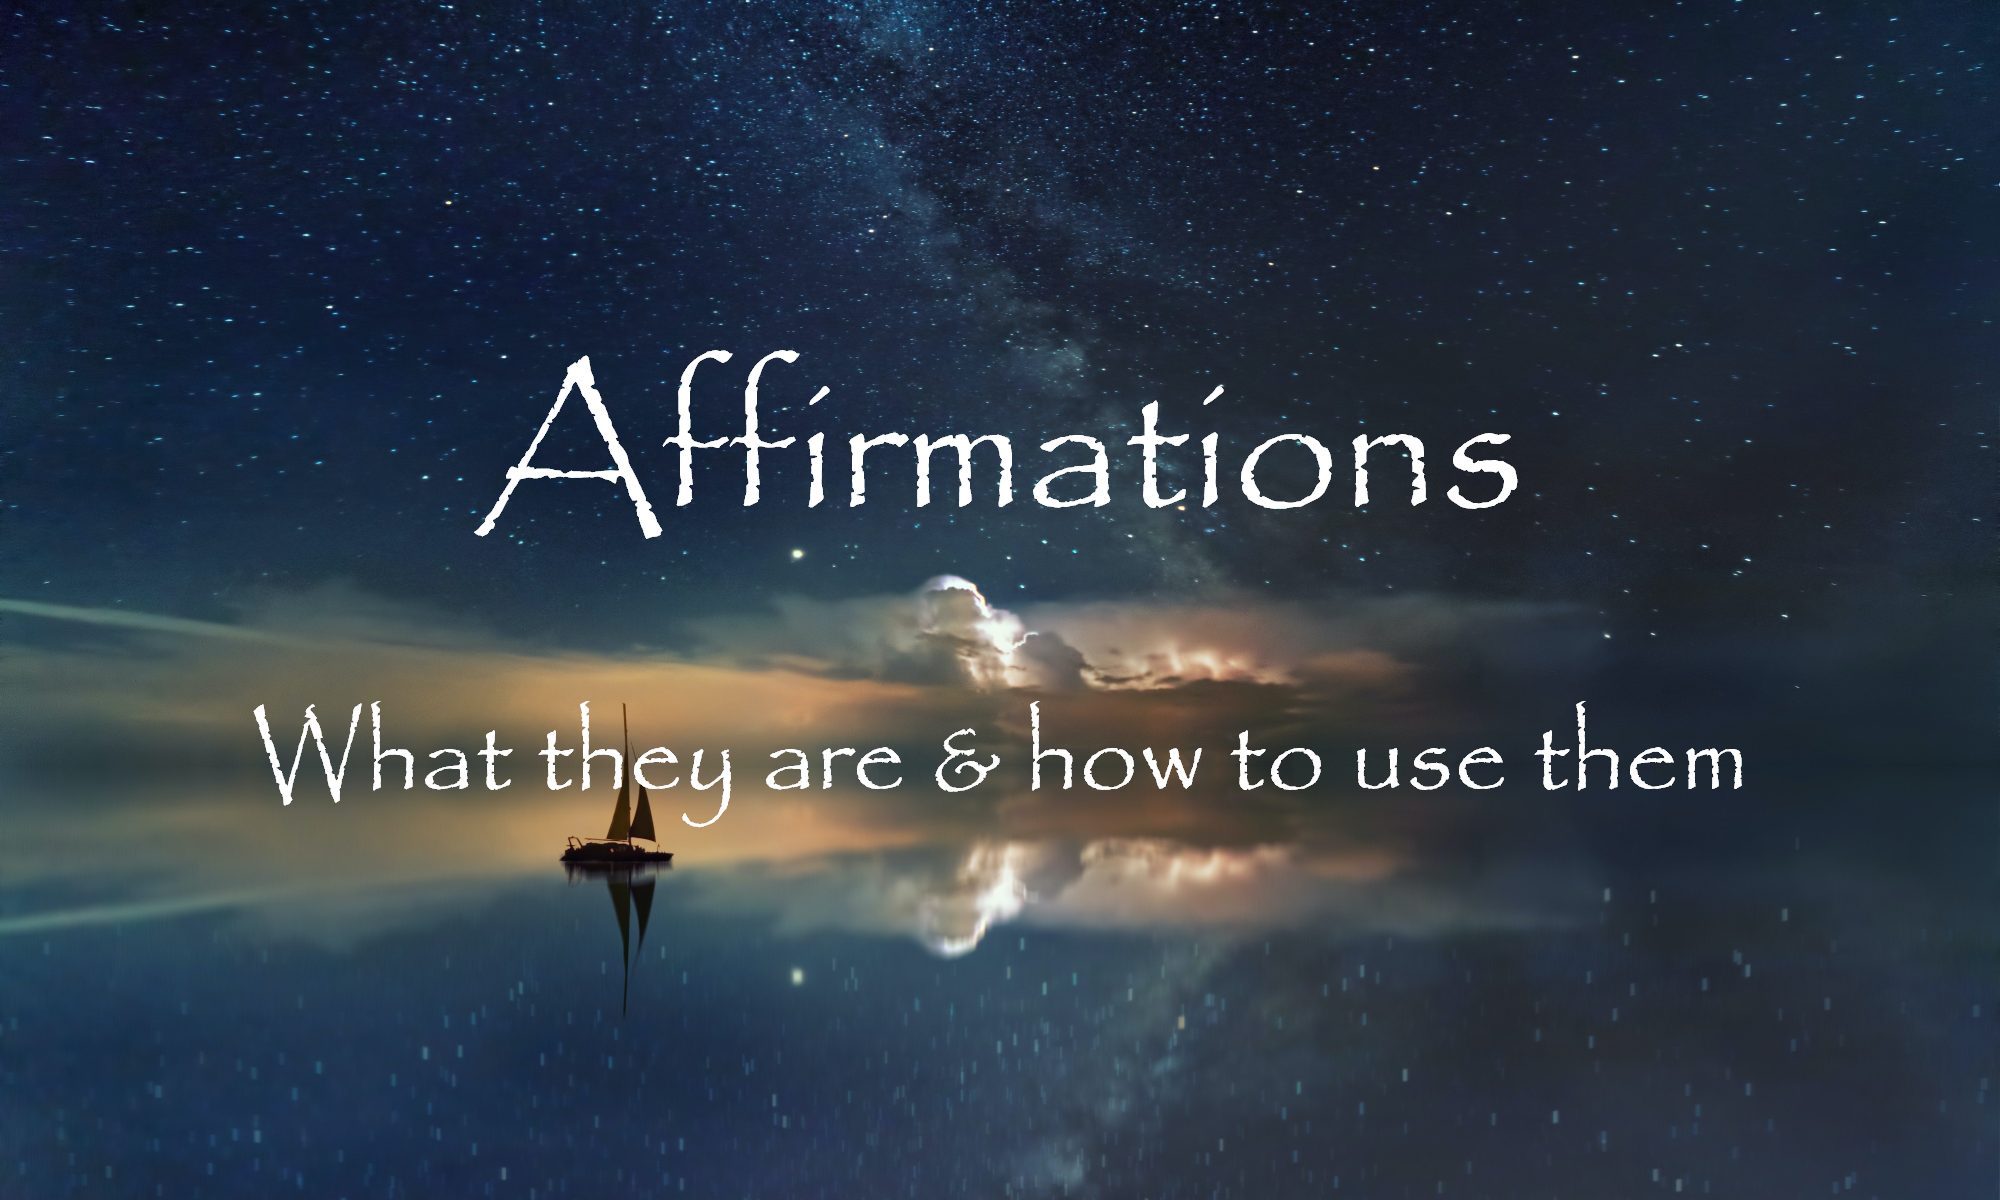 What Are Affirmations & How to Use Them: The Creative Power of Your Imagination